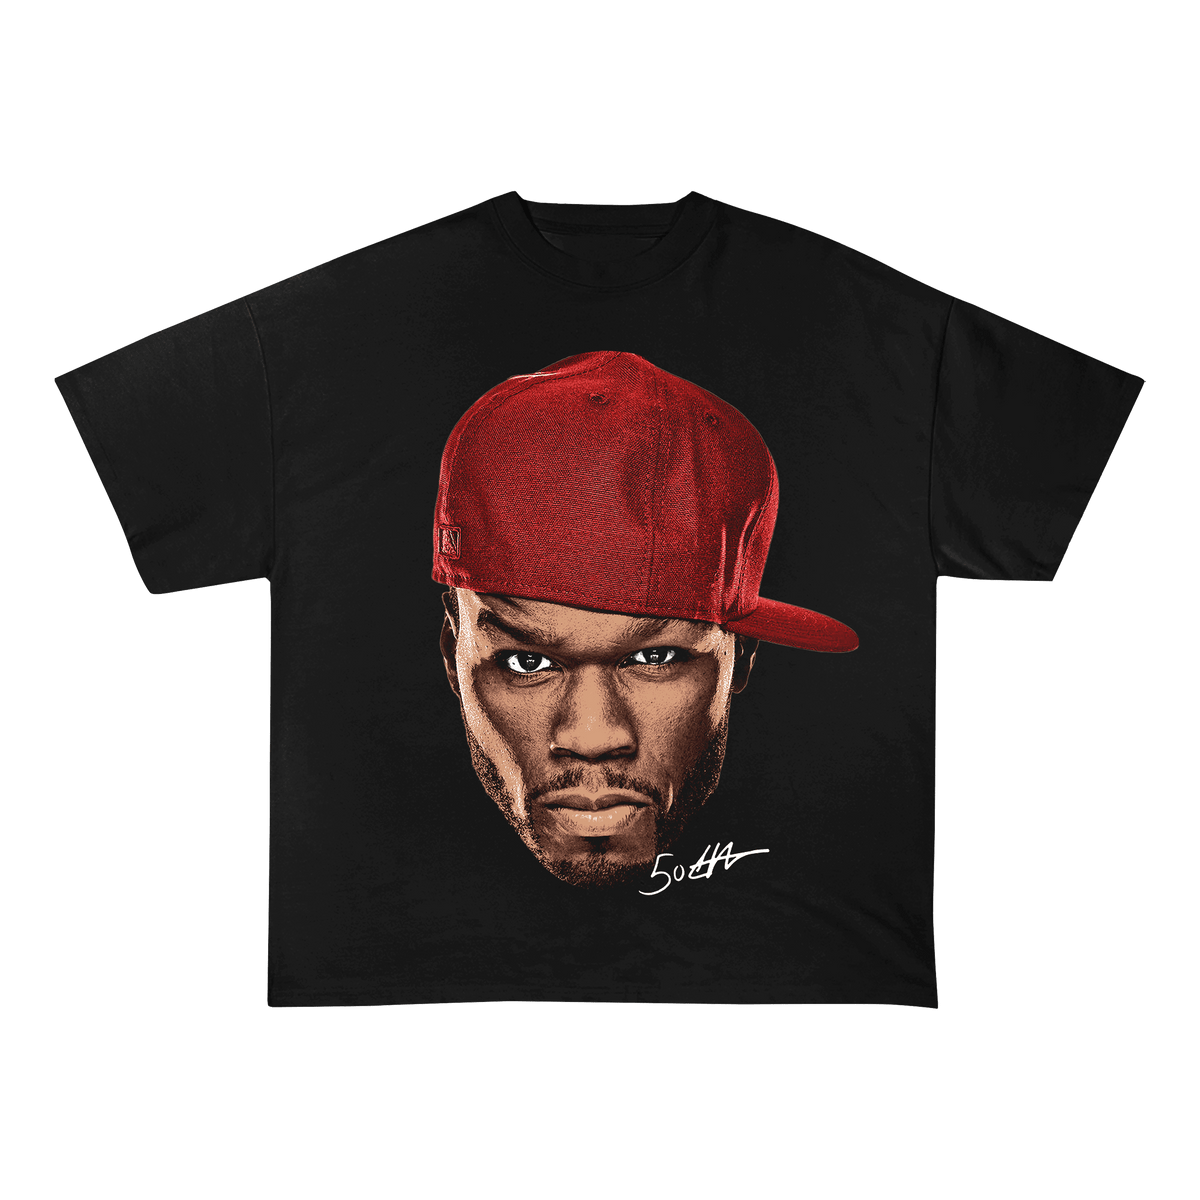 RDMCLOTHINGART tapestry hoodie 50CENT WEIGHT COTTON TEE-8028